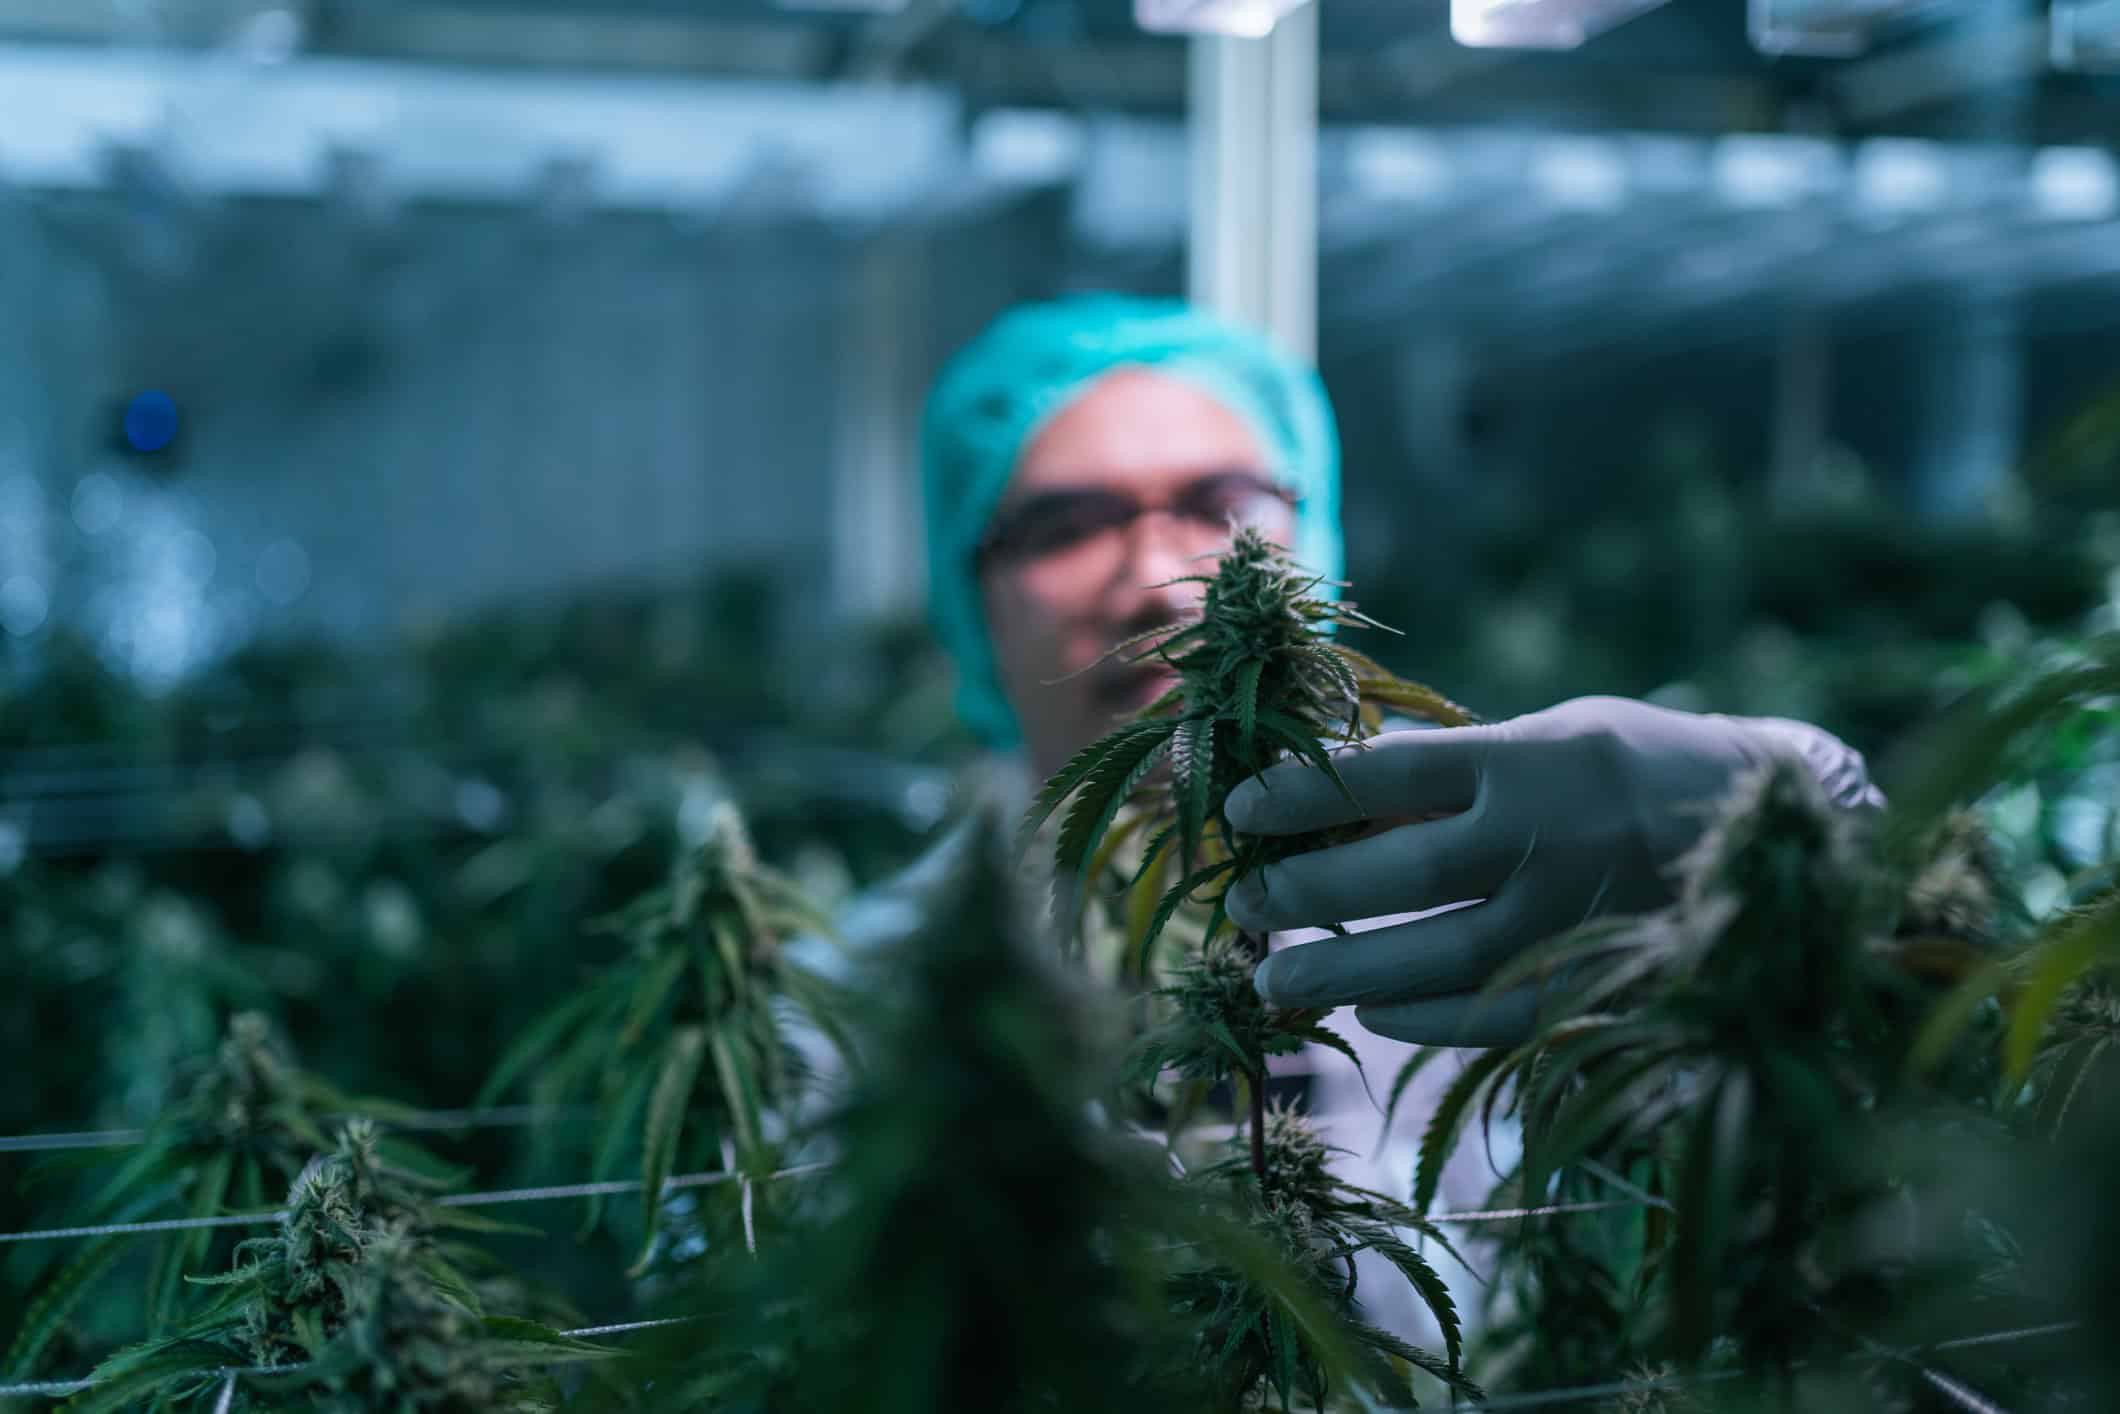 420 Day: Cannabis researcher in nightshift checking a cannabis flower in lab farm greenhouse.Image credit: iStock